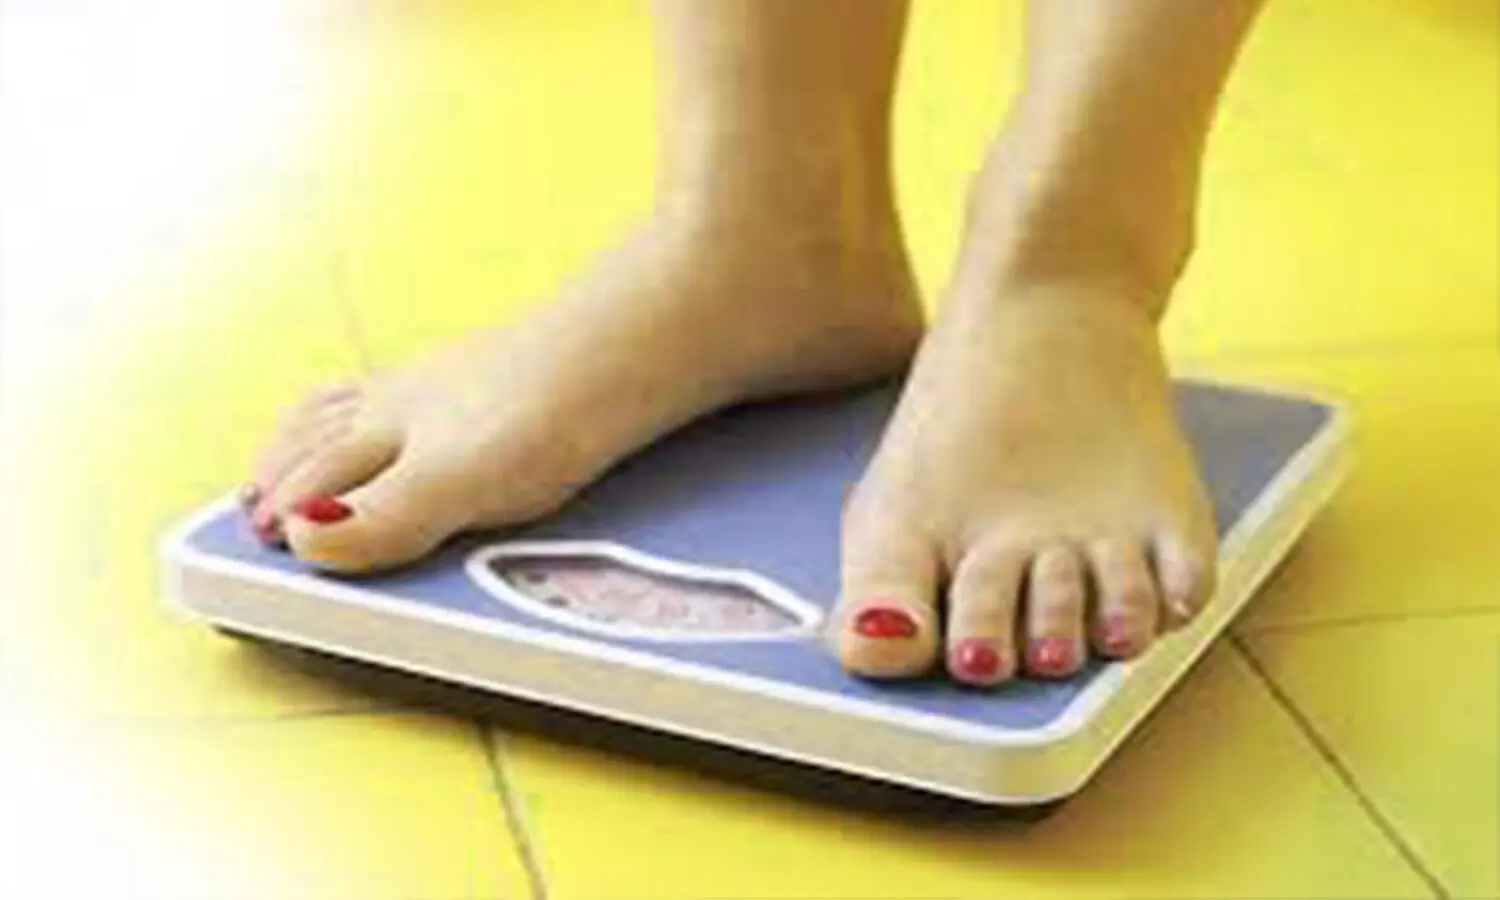 Diet and exercise reduced weight and knee pain in obese osteoarthritis patients: JAMA